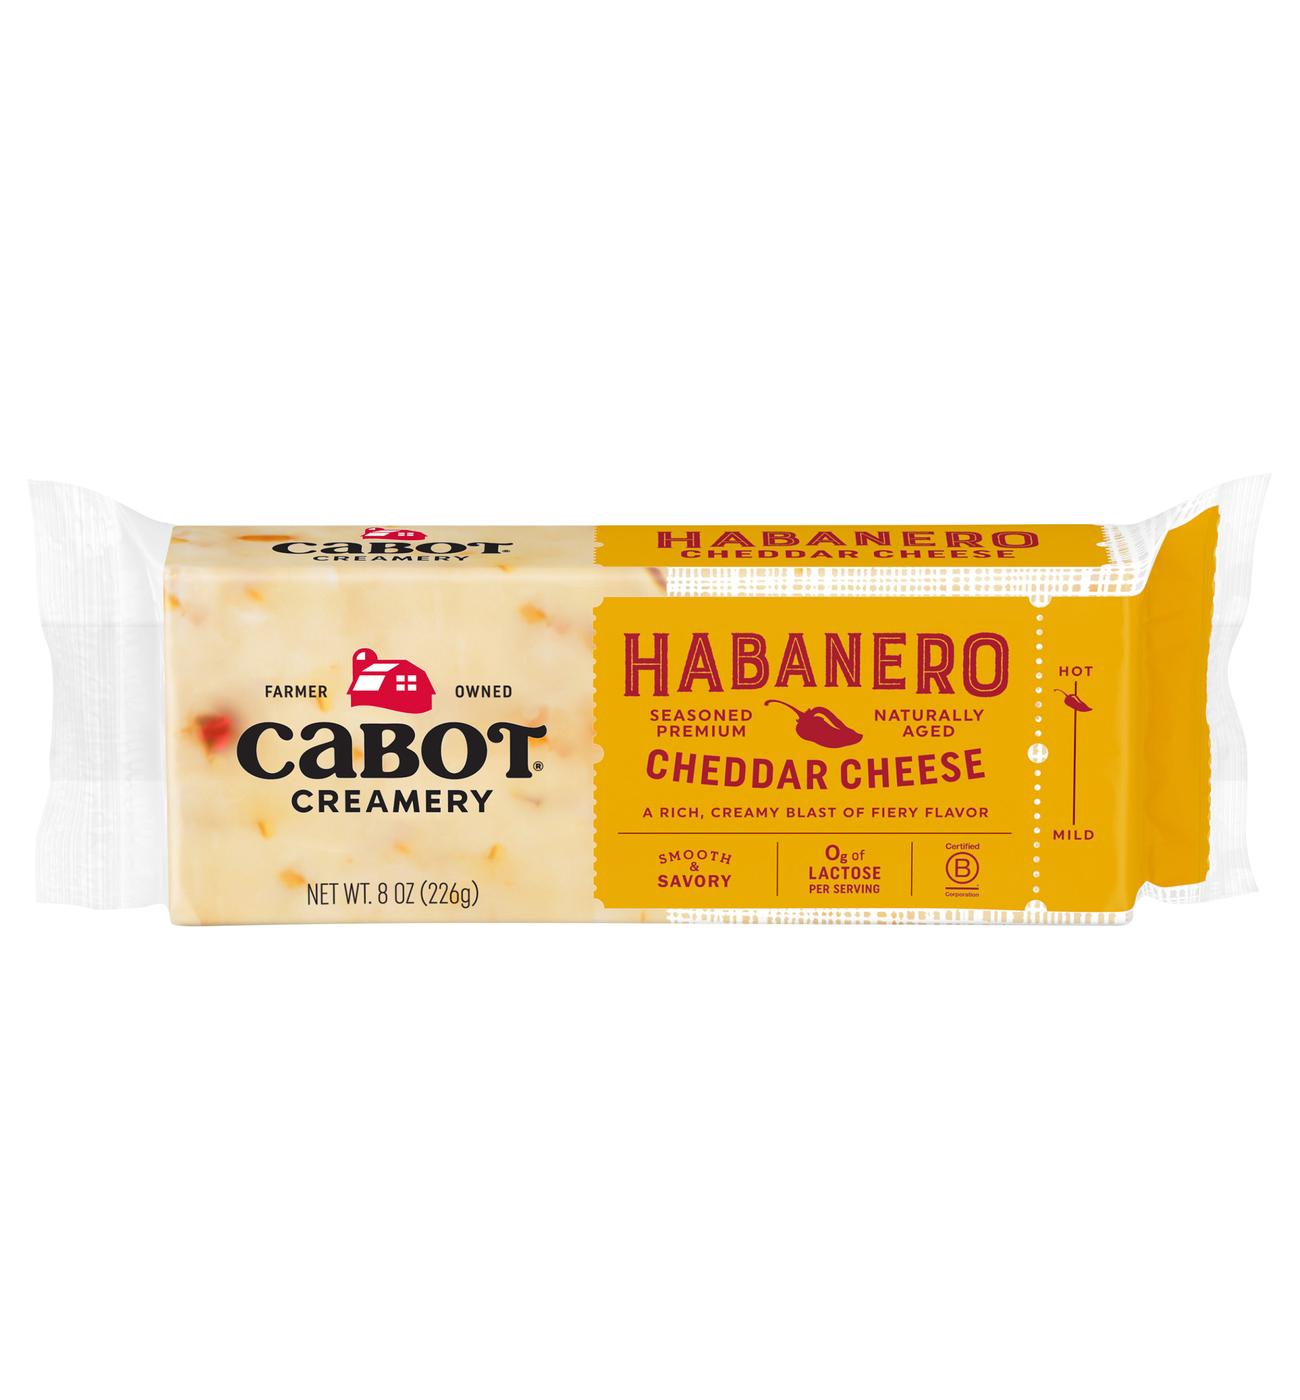 CABOT Habanero Cheddar Cheese; image 1 of 2